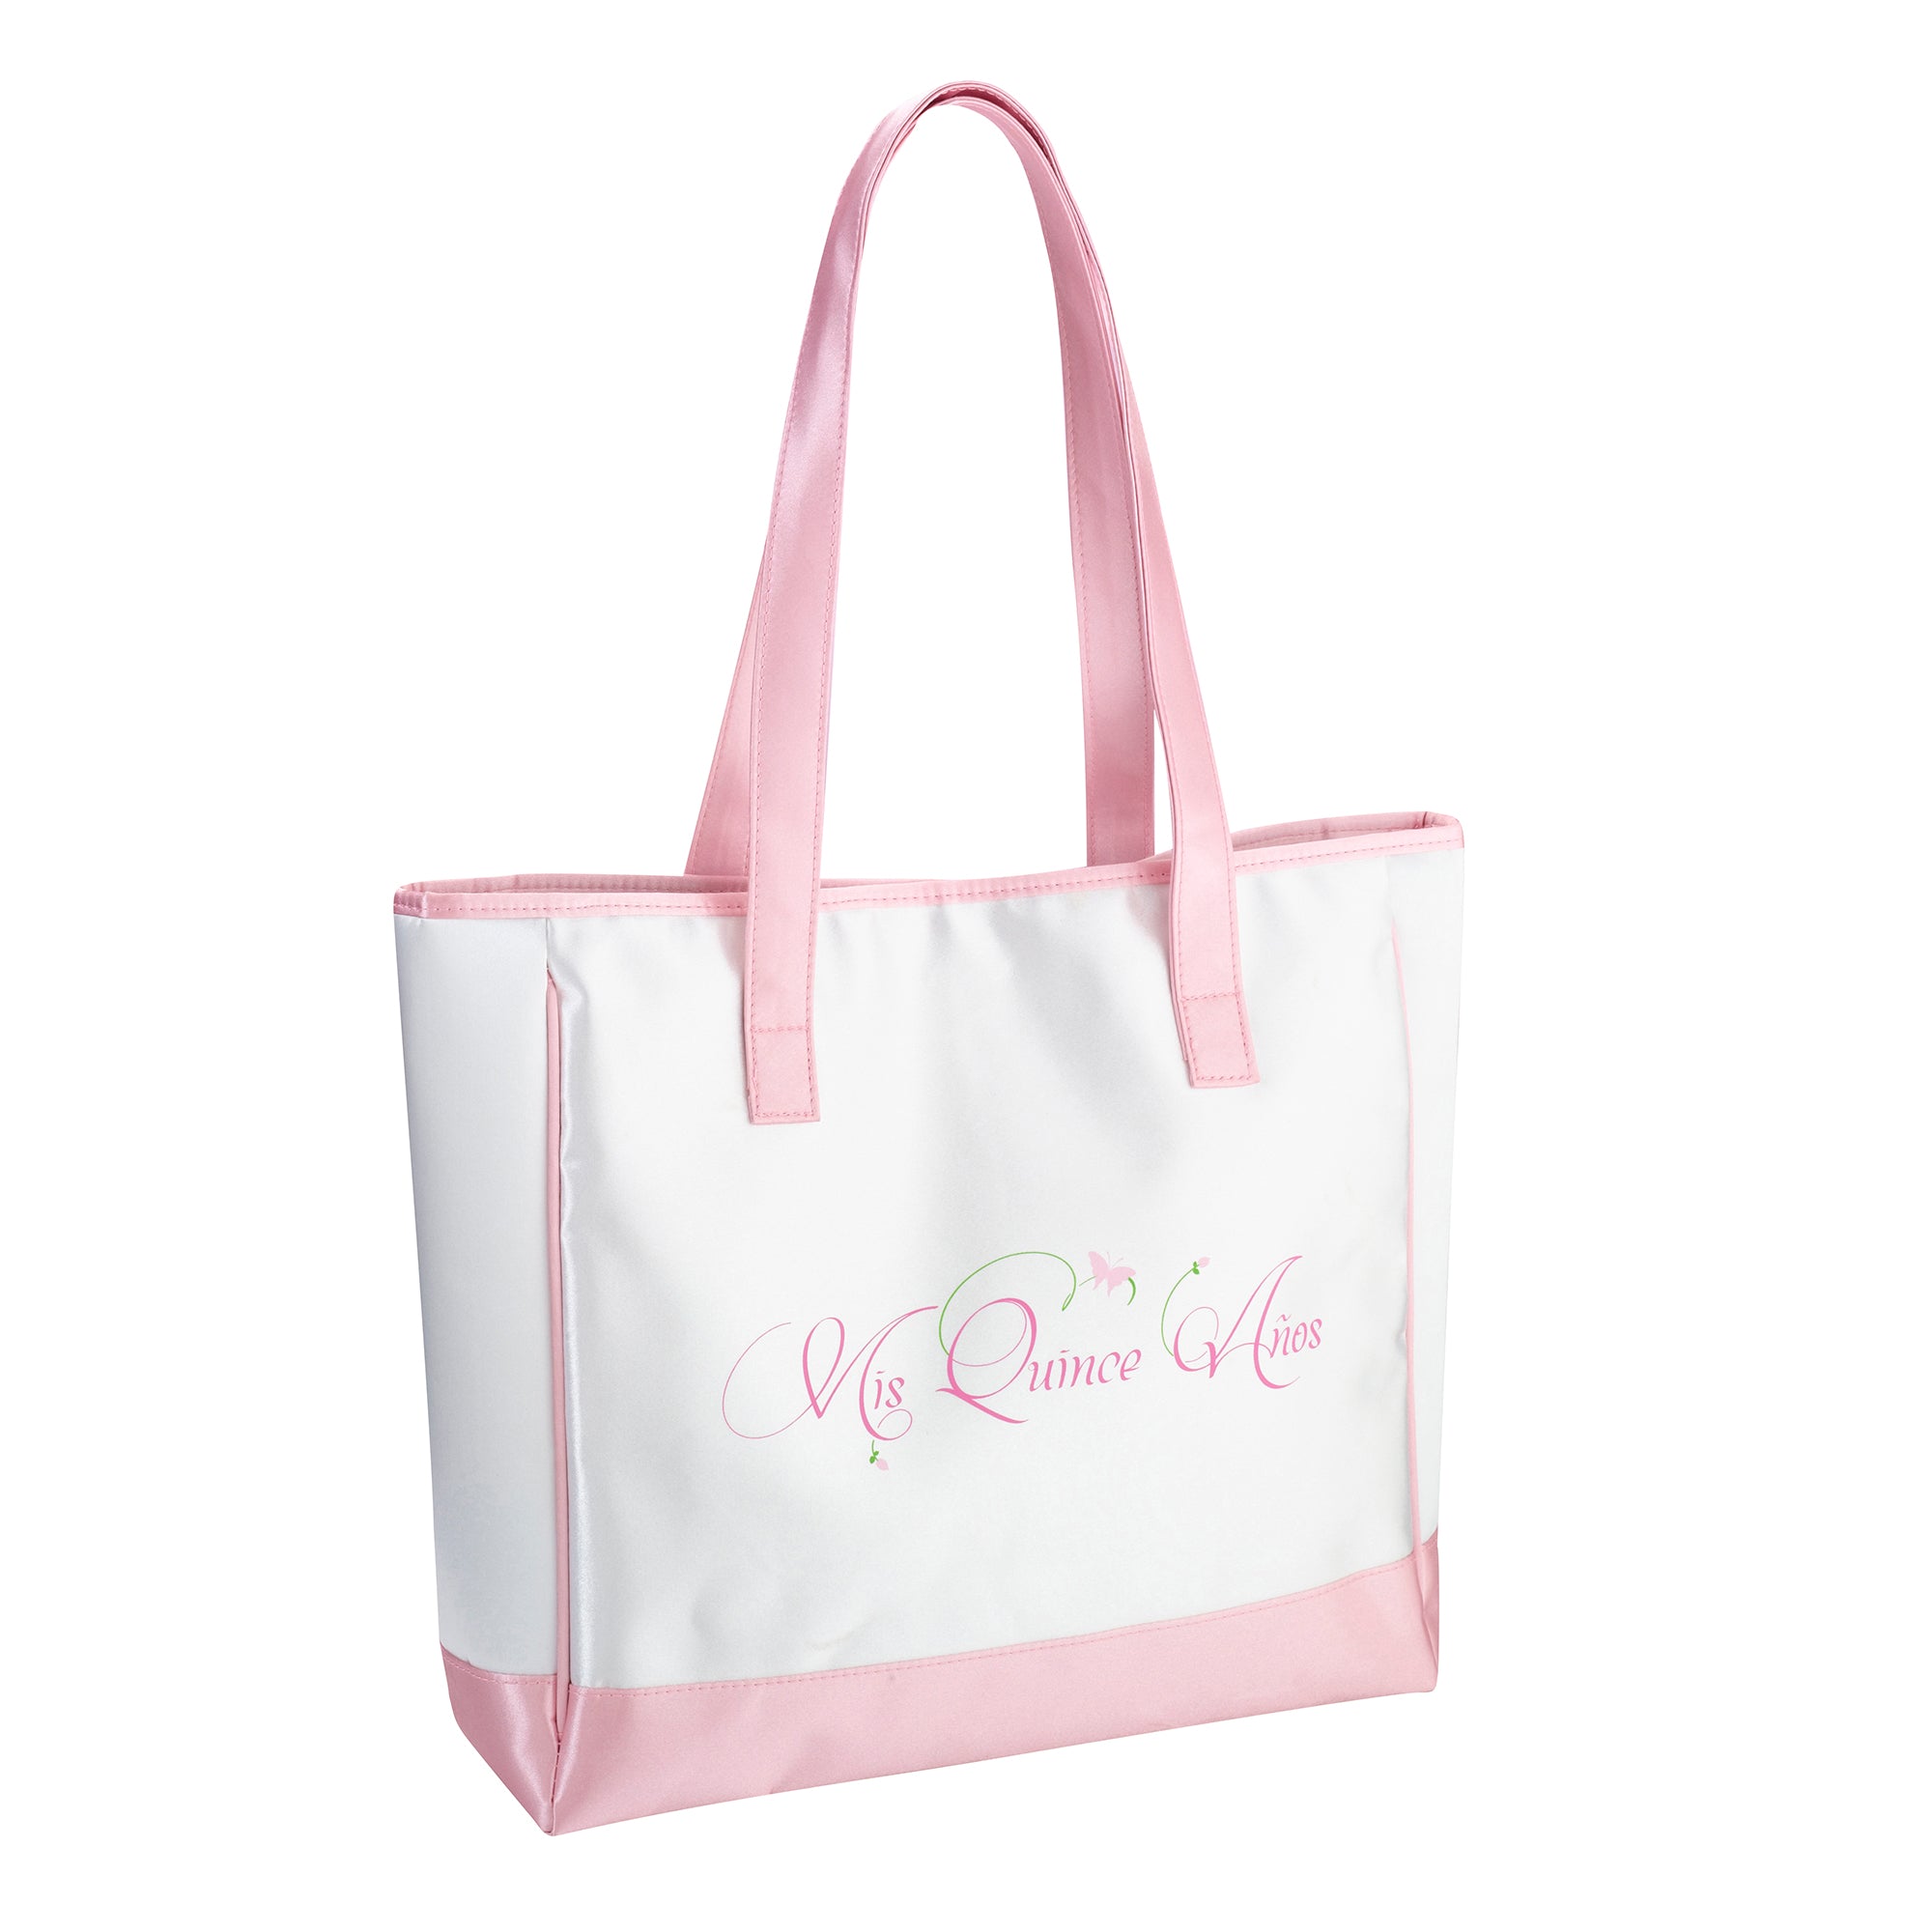 Quince Anos Tote Bag 15th Birthday Gift